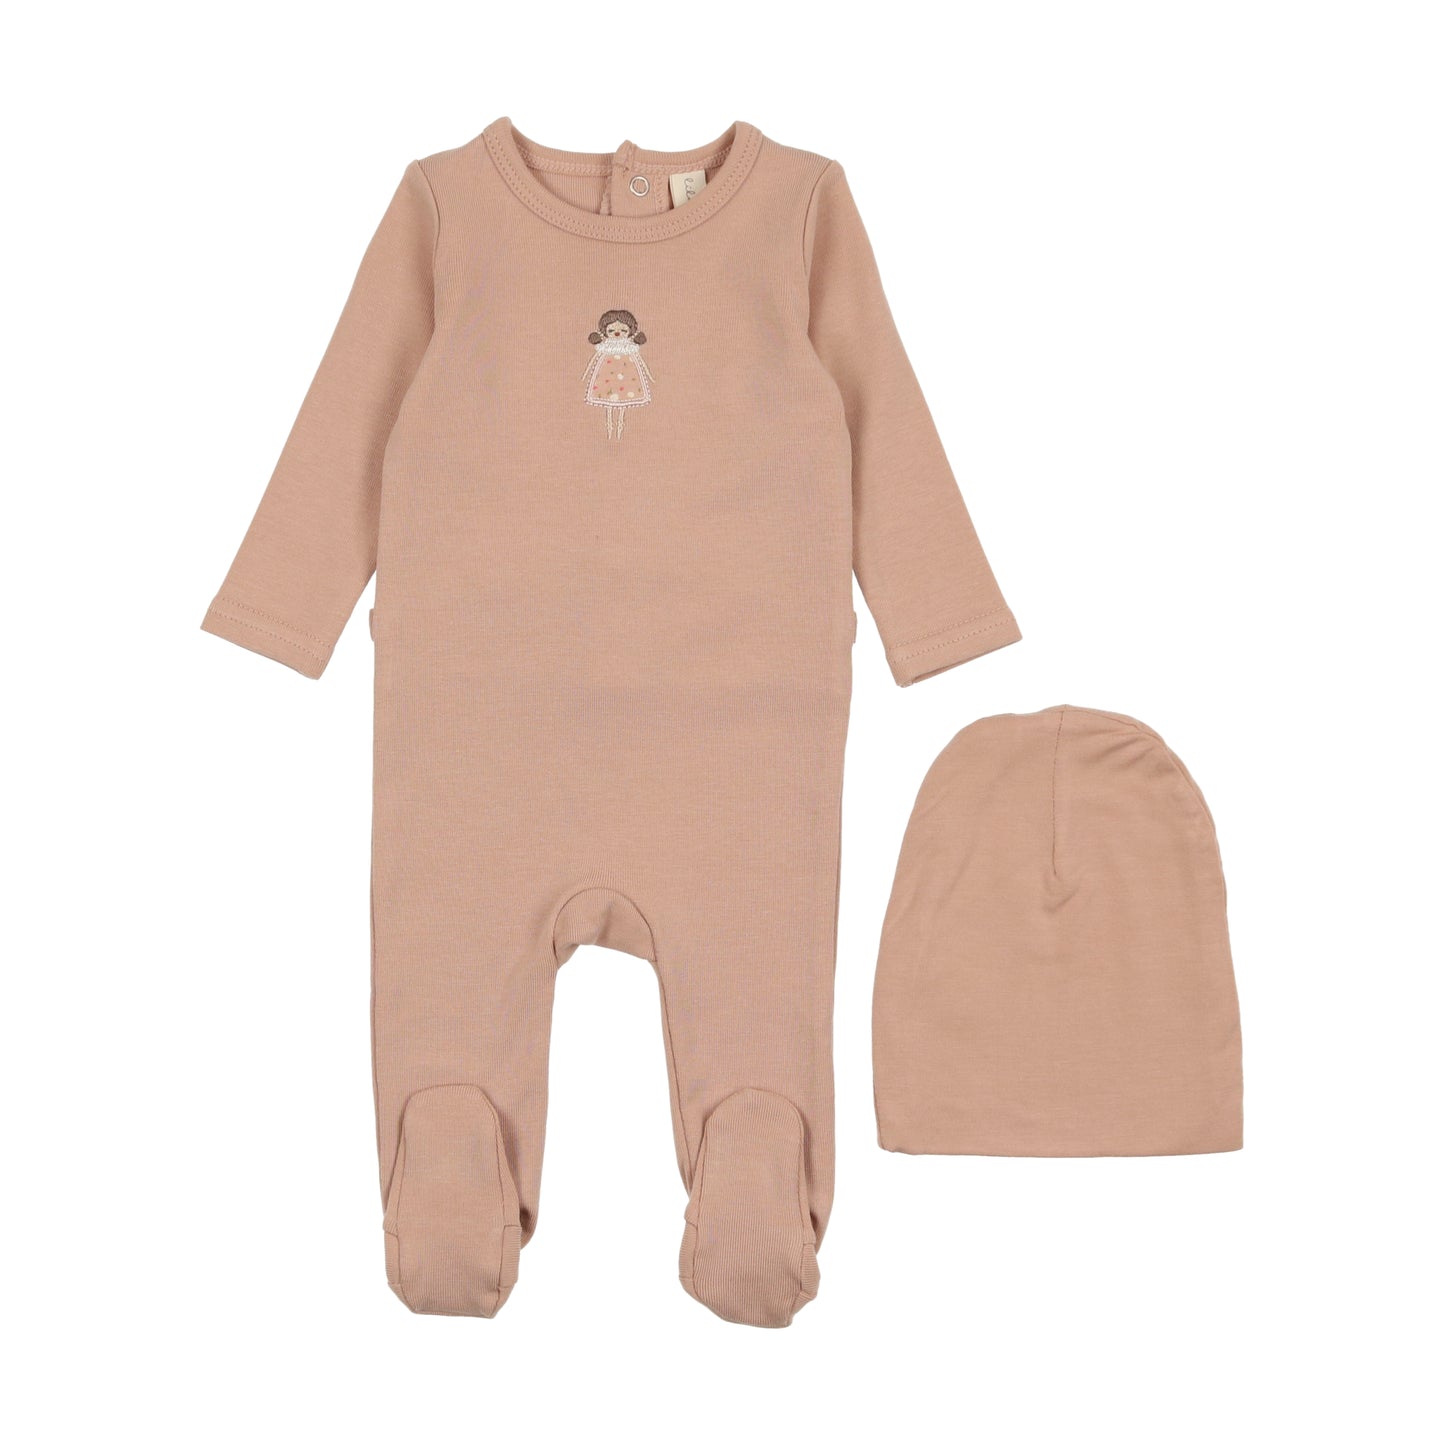 Embroidered Pink Doll Footie Set